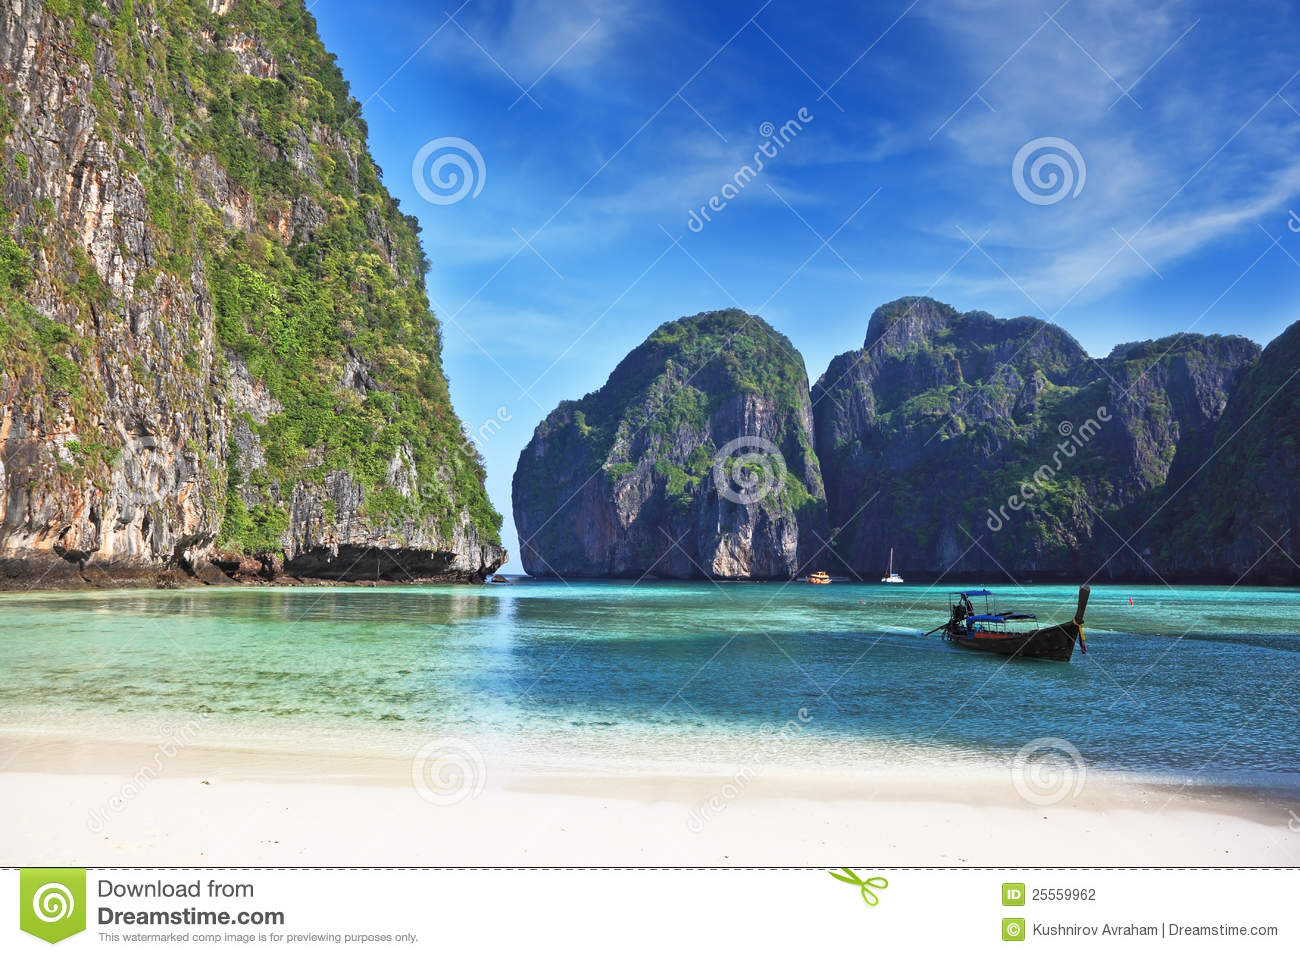 Cove Off The Coast Of Thailand  Emerald Water Lapping At The Cliffs